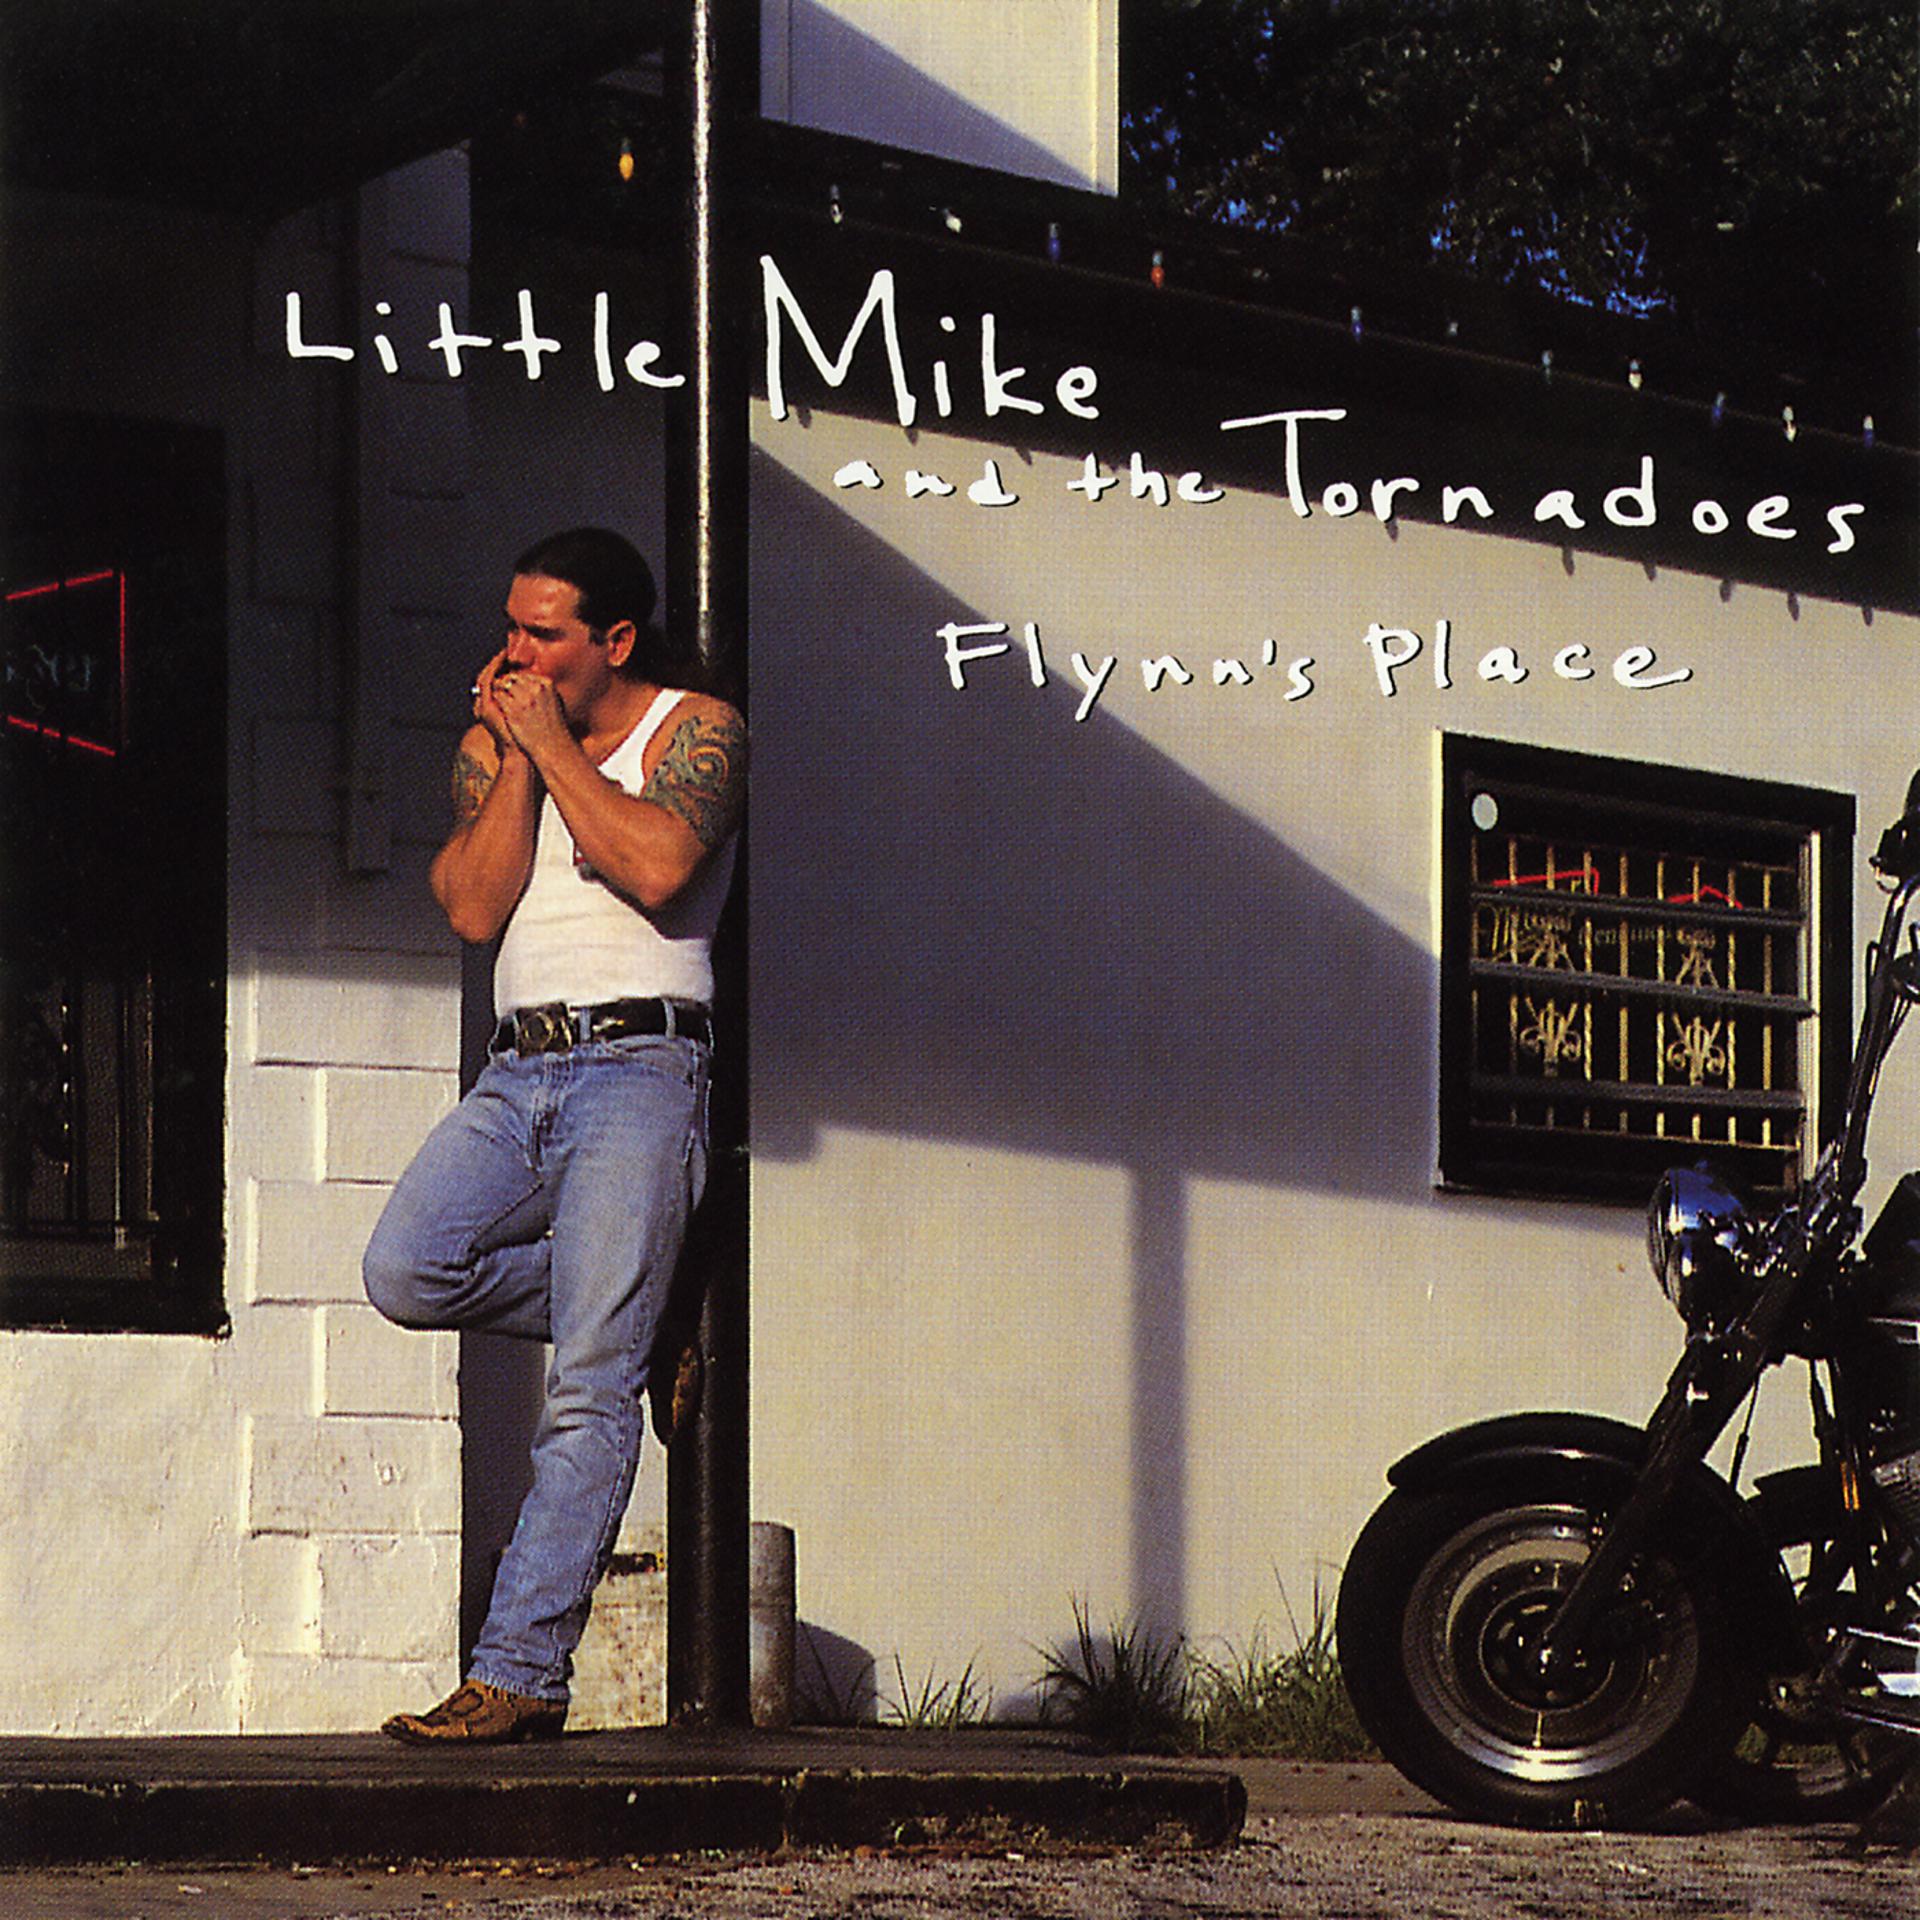 Mike little. Little Mike the Tornadoes. Little Mike & the Tornadoes Cover. Little Mike left his Bike like Tike at Spike's.. Michael Lil Humper.